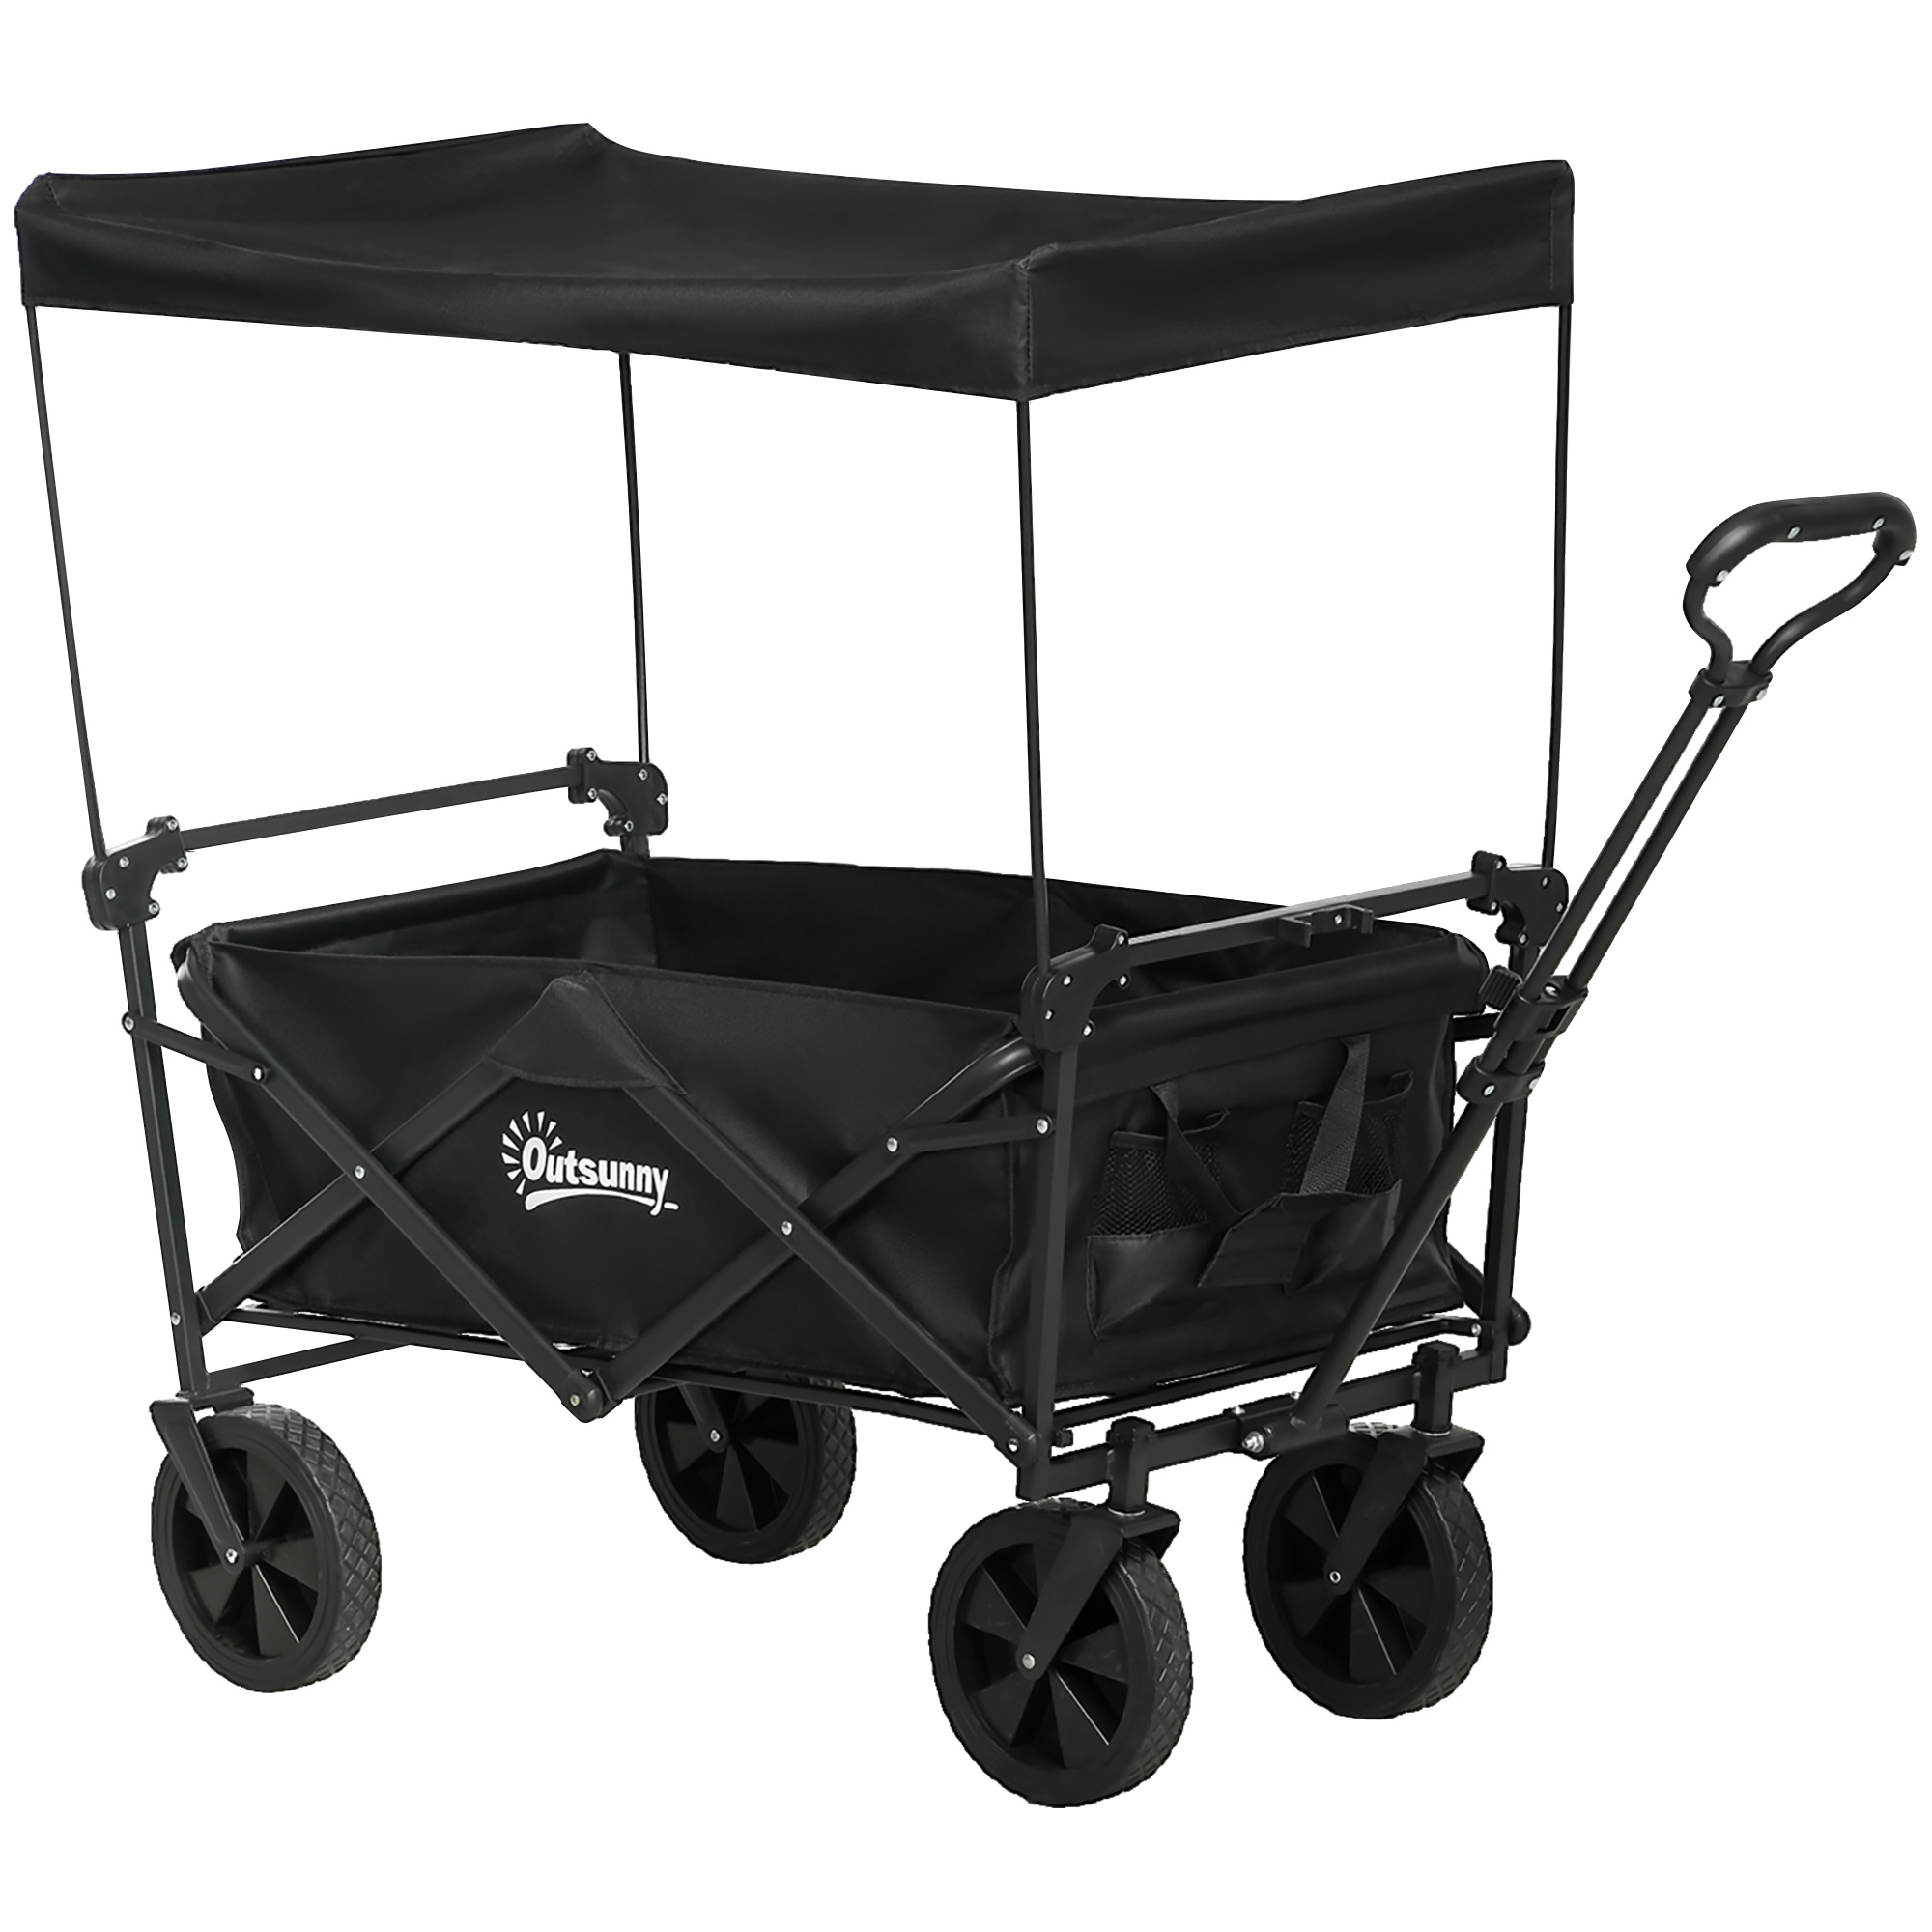 Collapsible Wagon Cart with Removable Canopy, Heavy Duty